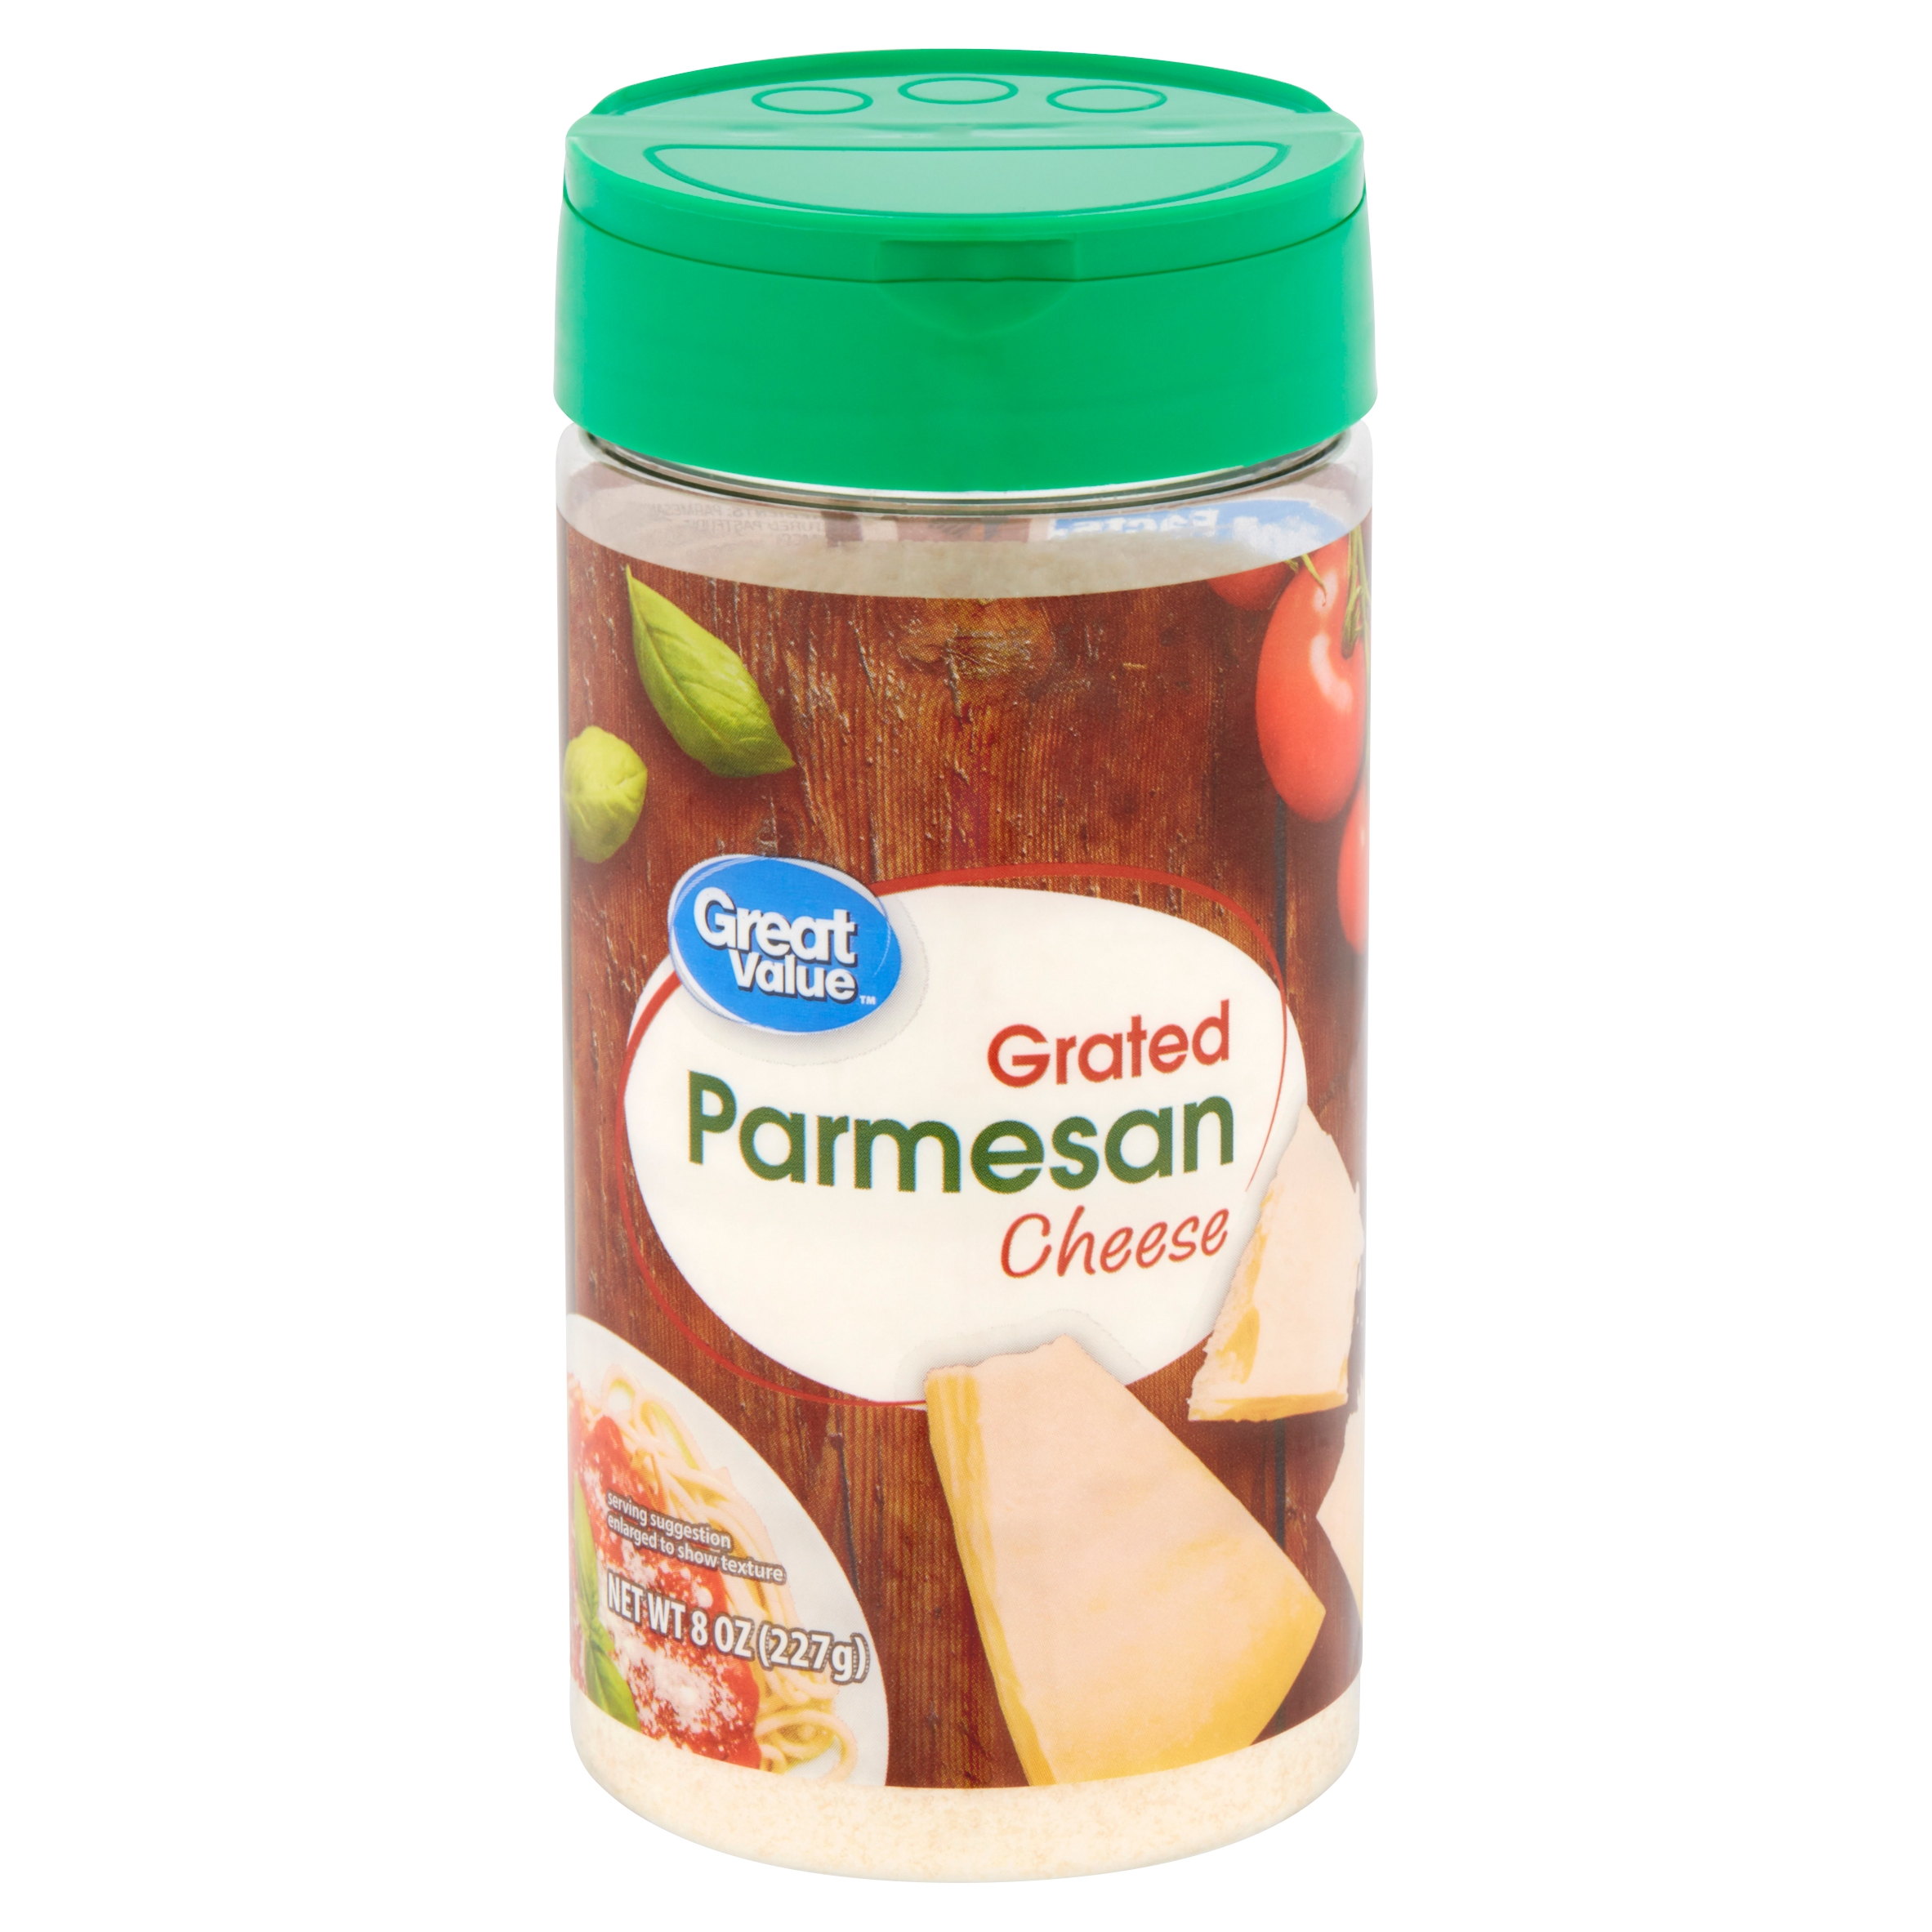 (3 Pack) Great Value 100% Parmesan Grated Cheese, 8 Oz Image